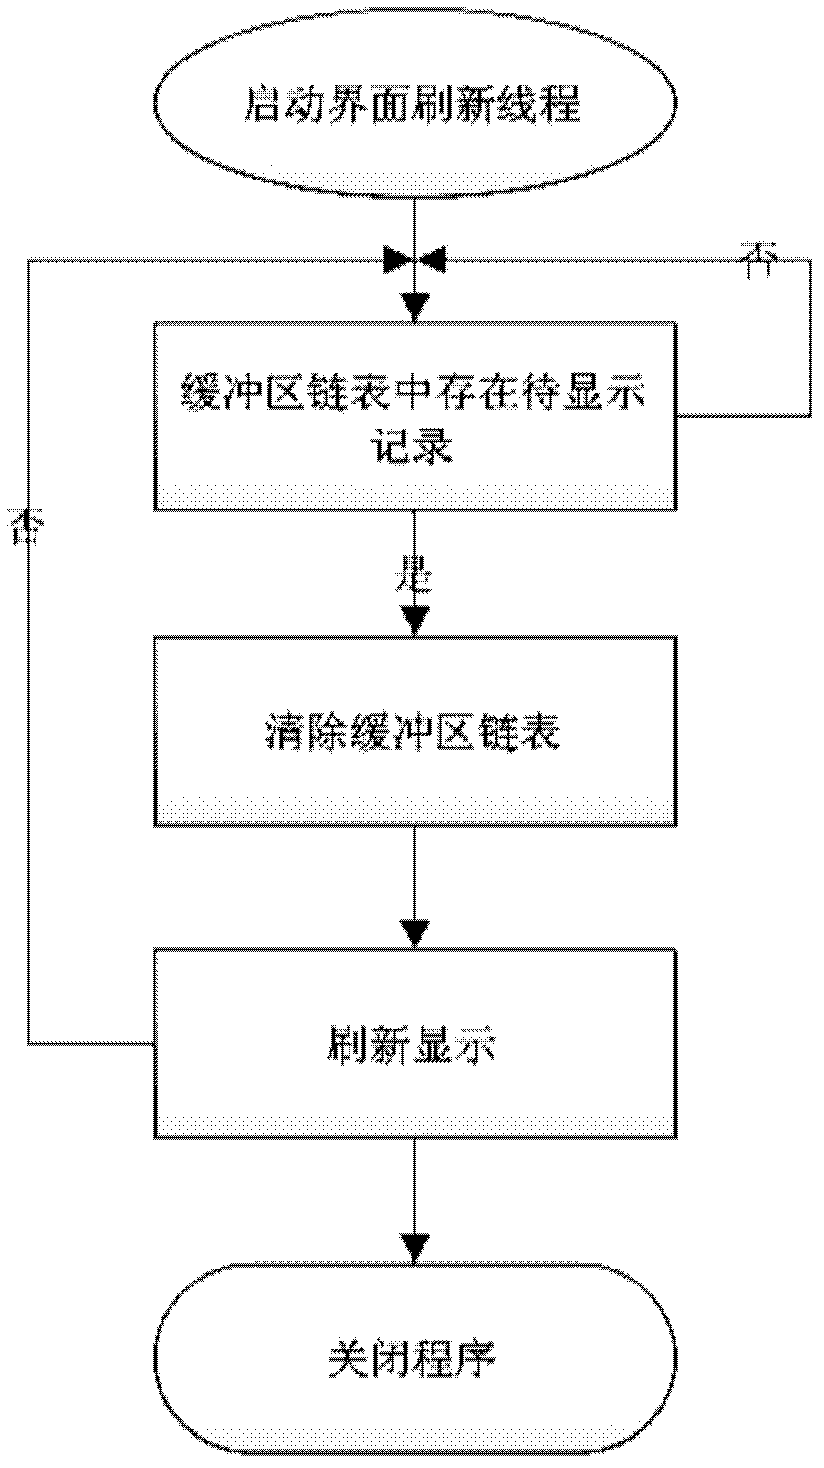 CAN (controller area network) bus scheduling analysis and monitoring system